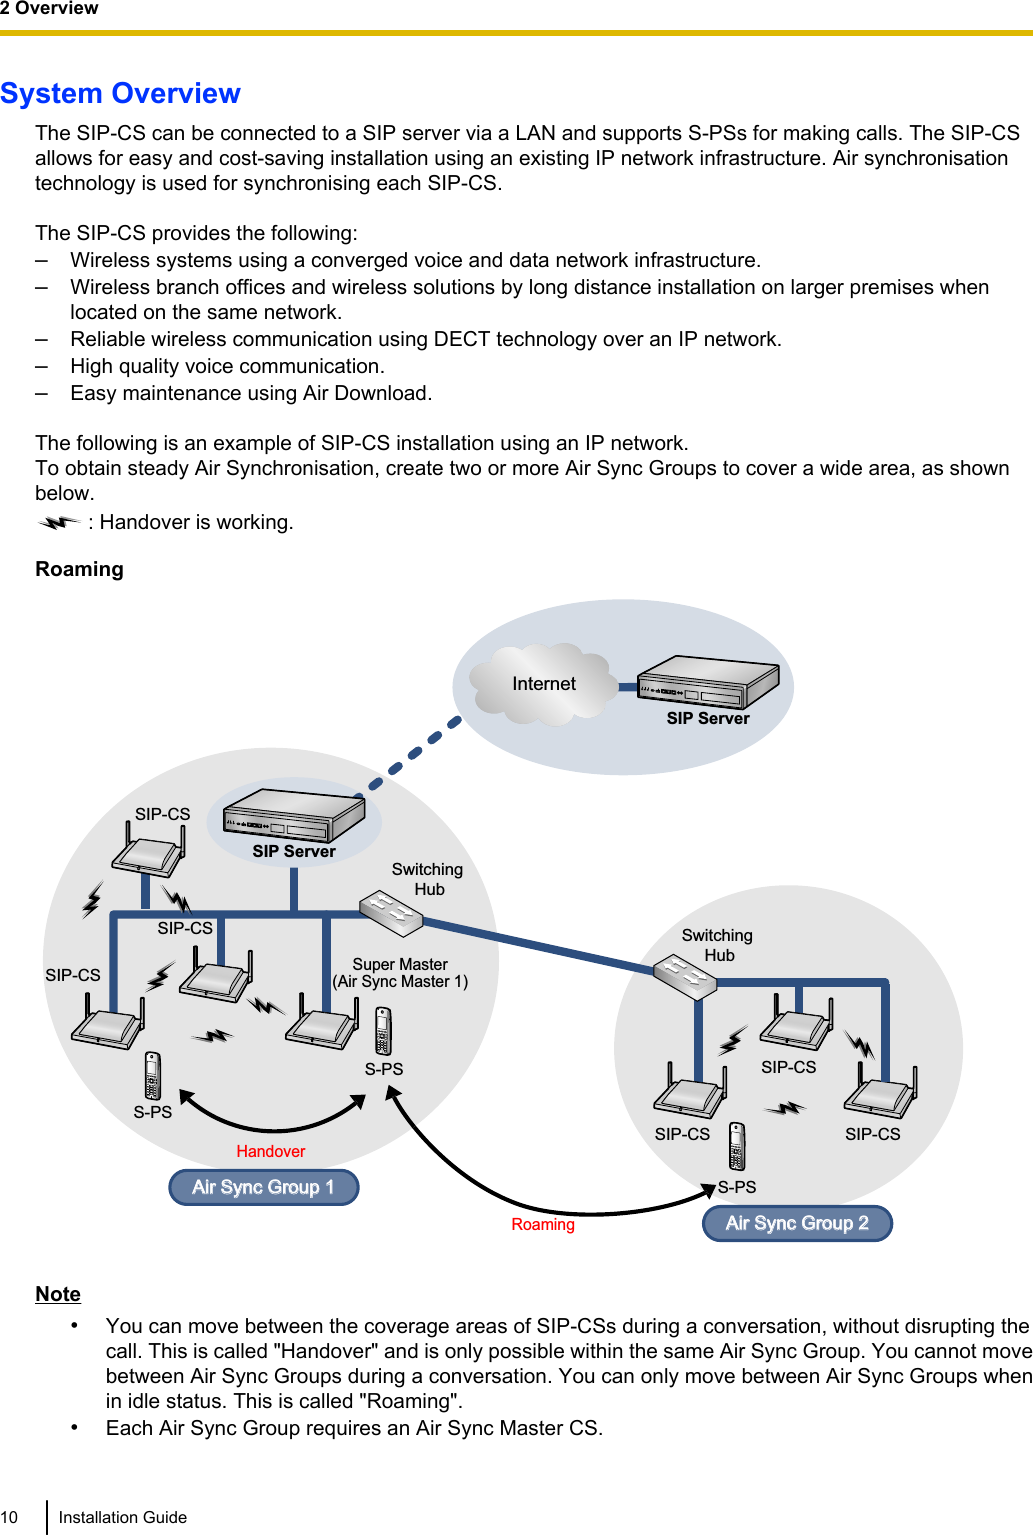 System OverviewThe SIP-CS can be connected to a SIP server via a LAN and supports S-PSs for making calls. The SIP-CSallows for easy and cost-saving installation using an existing IP network infrastructure. Air synchronisationtechnology is used for synchronising each SIP-CS.The SIP-CS provides the following:–Wireless systems using a converged voice and data network infrastructure.–Wireless branch offices and wireless solutions by long distance installation on larger premises whenlocated on the same network.–Reliable wireless communication using DECT technology over an IP network.–High quality voice communication.–Easy maintenance using Air Download.The following is an example of SIP-CS installation using an IP network.To obtain steady Air Synchronisation, create two or more Air Sync Groups to cover a wide area, as shownbelow.: Handover is working.RoamingS-PSSwitching HubSIP-CSSuper Master(Air Sync Master 1)SIP-CSAir Sync Group 1Air Sync Group 1S-PSHandoverSIP ServerSIP-CSSIP ServerSIP-CSAir Sync Group 2Air Sync Group 2Switching HubSIP-CS SIP-CSS-PSRoamingInternetNote•You can move between the coverage areas of SIP-CSs during a conversation, without disrupting thecall. This is called &quot;Handover&quot; and is only possible within the same Air Sync Group. You cannot movebetween Air Sync Groups during a conversation. You can only move between Air Sync Groups whenin idle status. This is called &quot;Roaming&quot;.•Each Air Sync Group requires an Air Sync Master CS.10 Installation Guide2 Overview